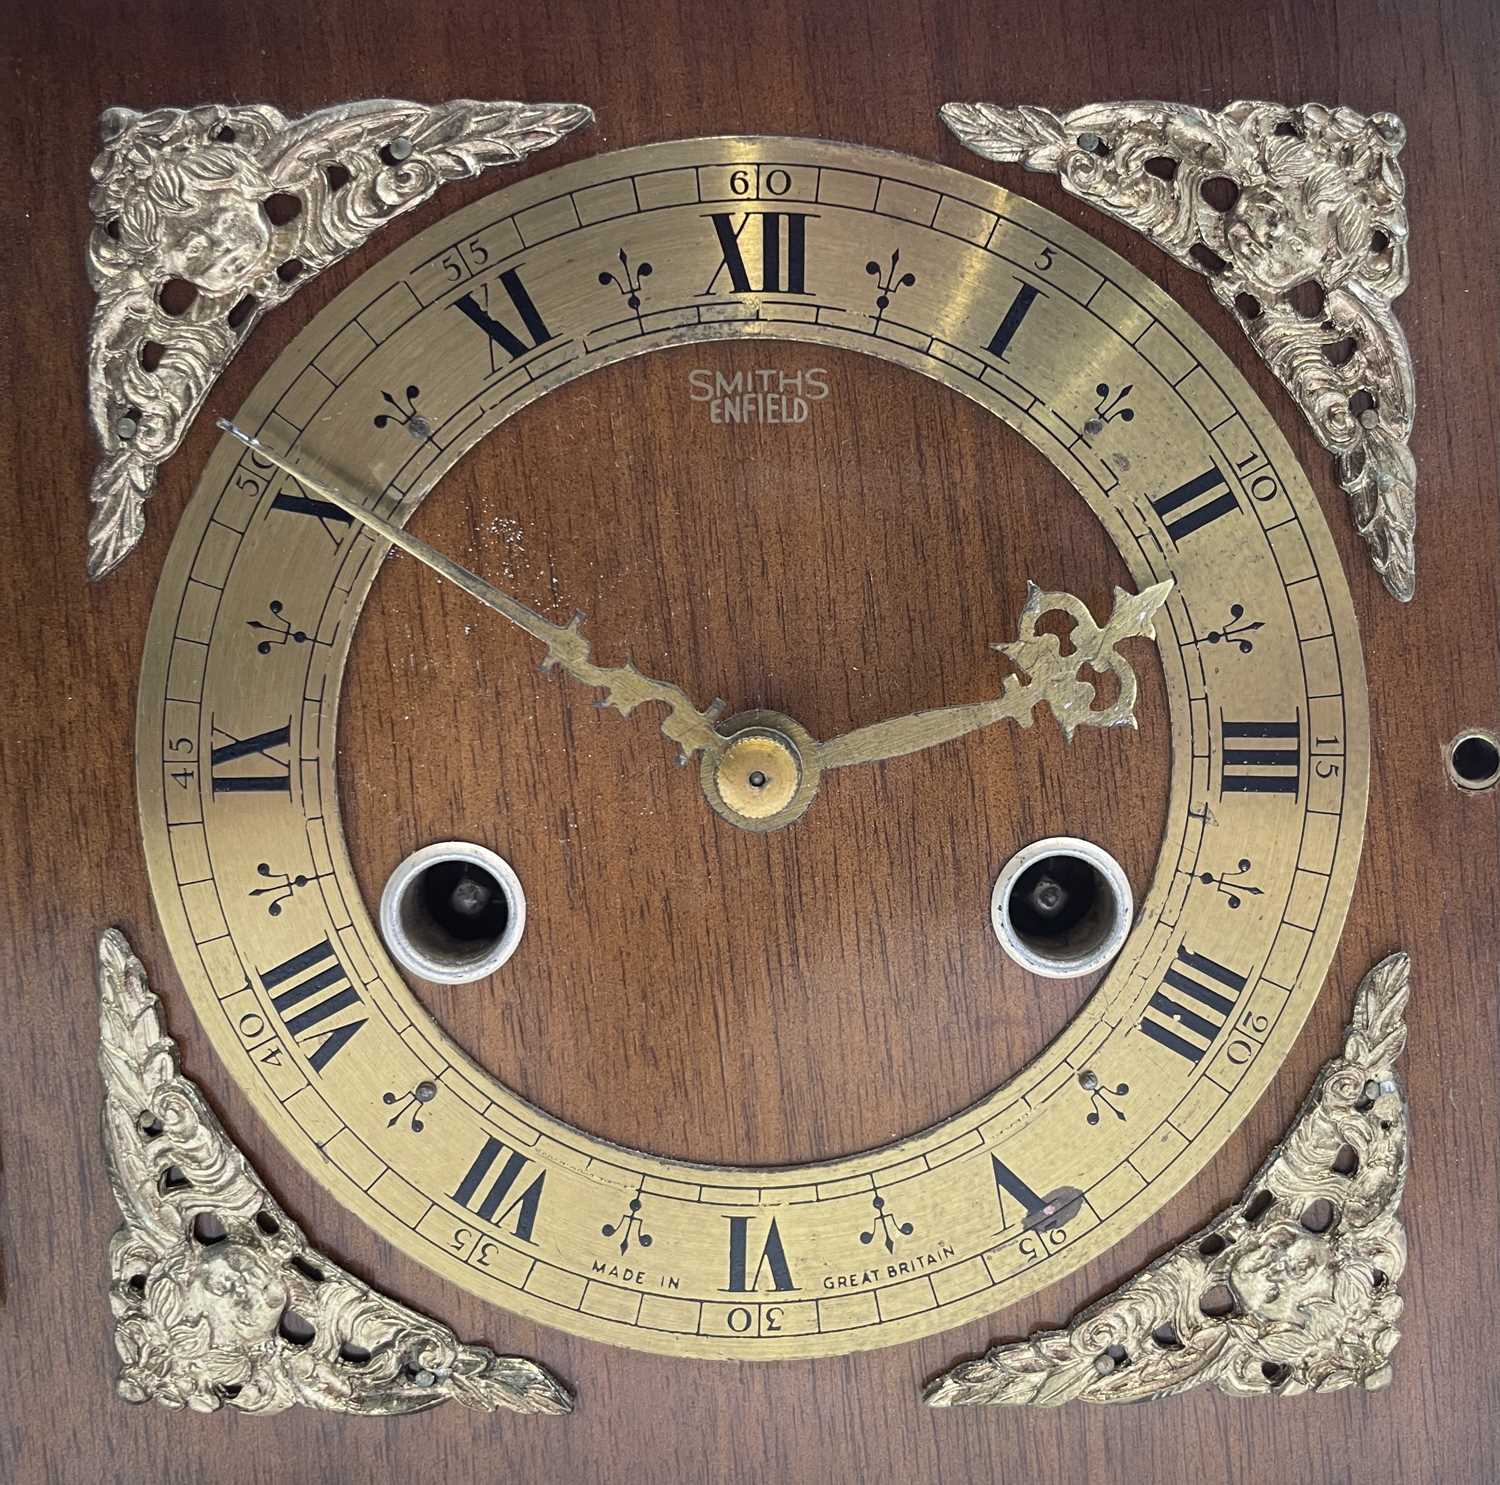 A walnut cased mantel clock, by Smiths, Enfield, height 23cm. - Image 2 of 4